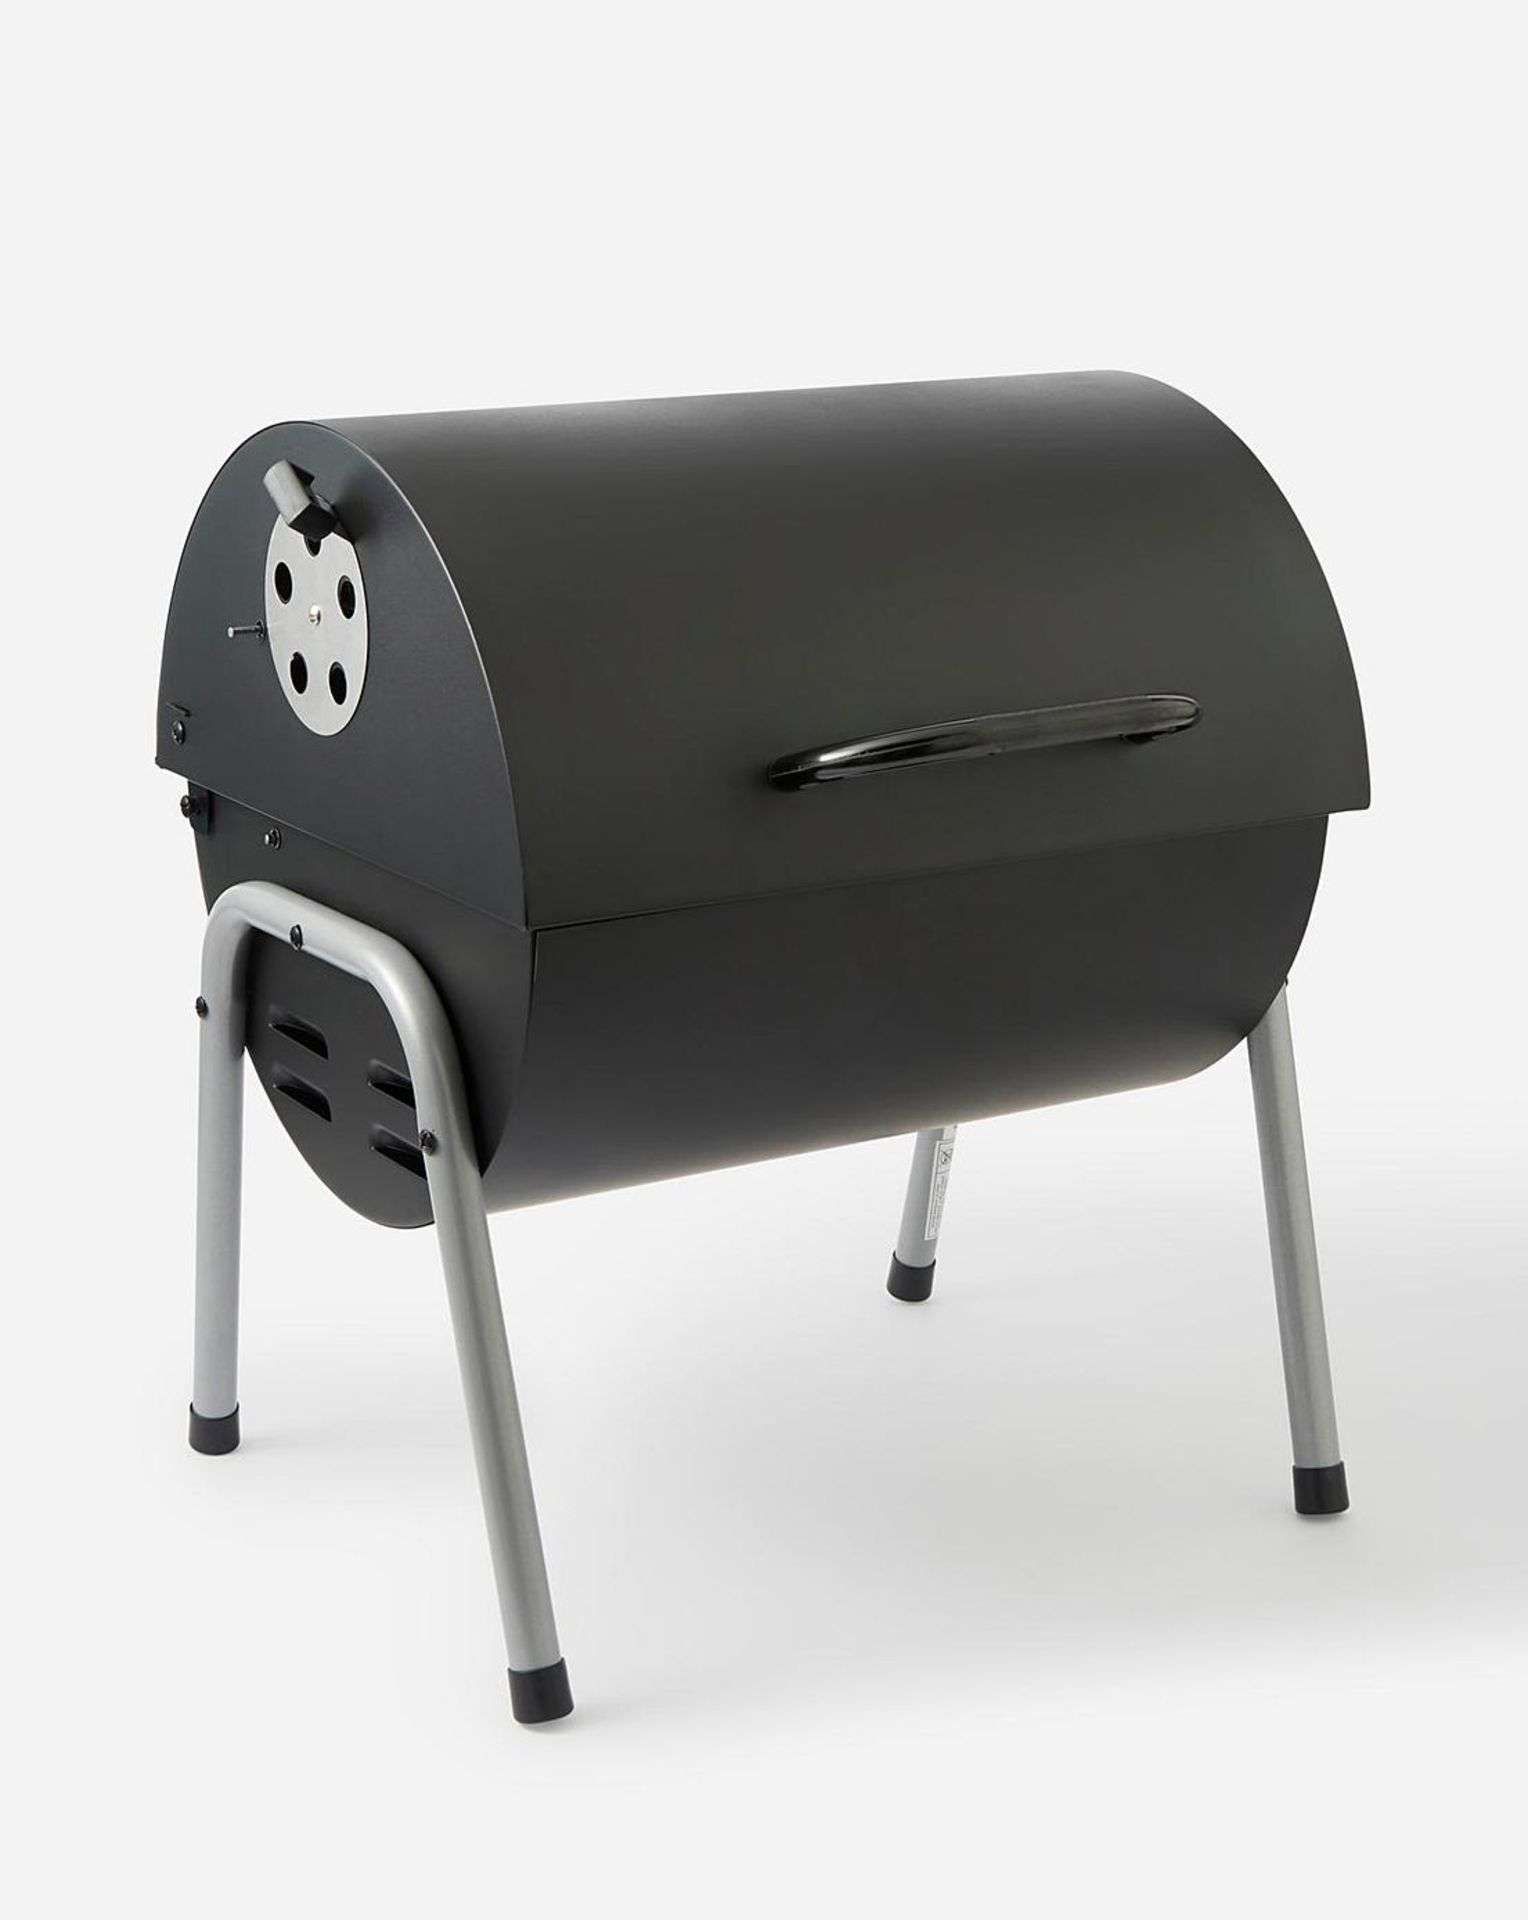 4x BRAND NEW Tabletop Oil Drum Barbeque Grill. RRP £59.99 EACH. Black steel firebowl with enamel - Bild 3 aus 4